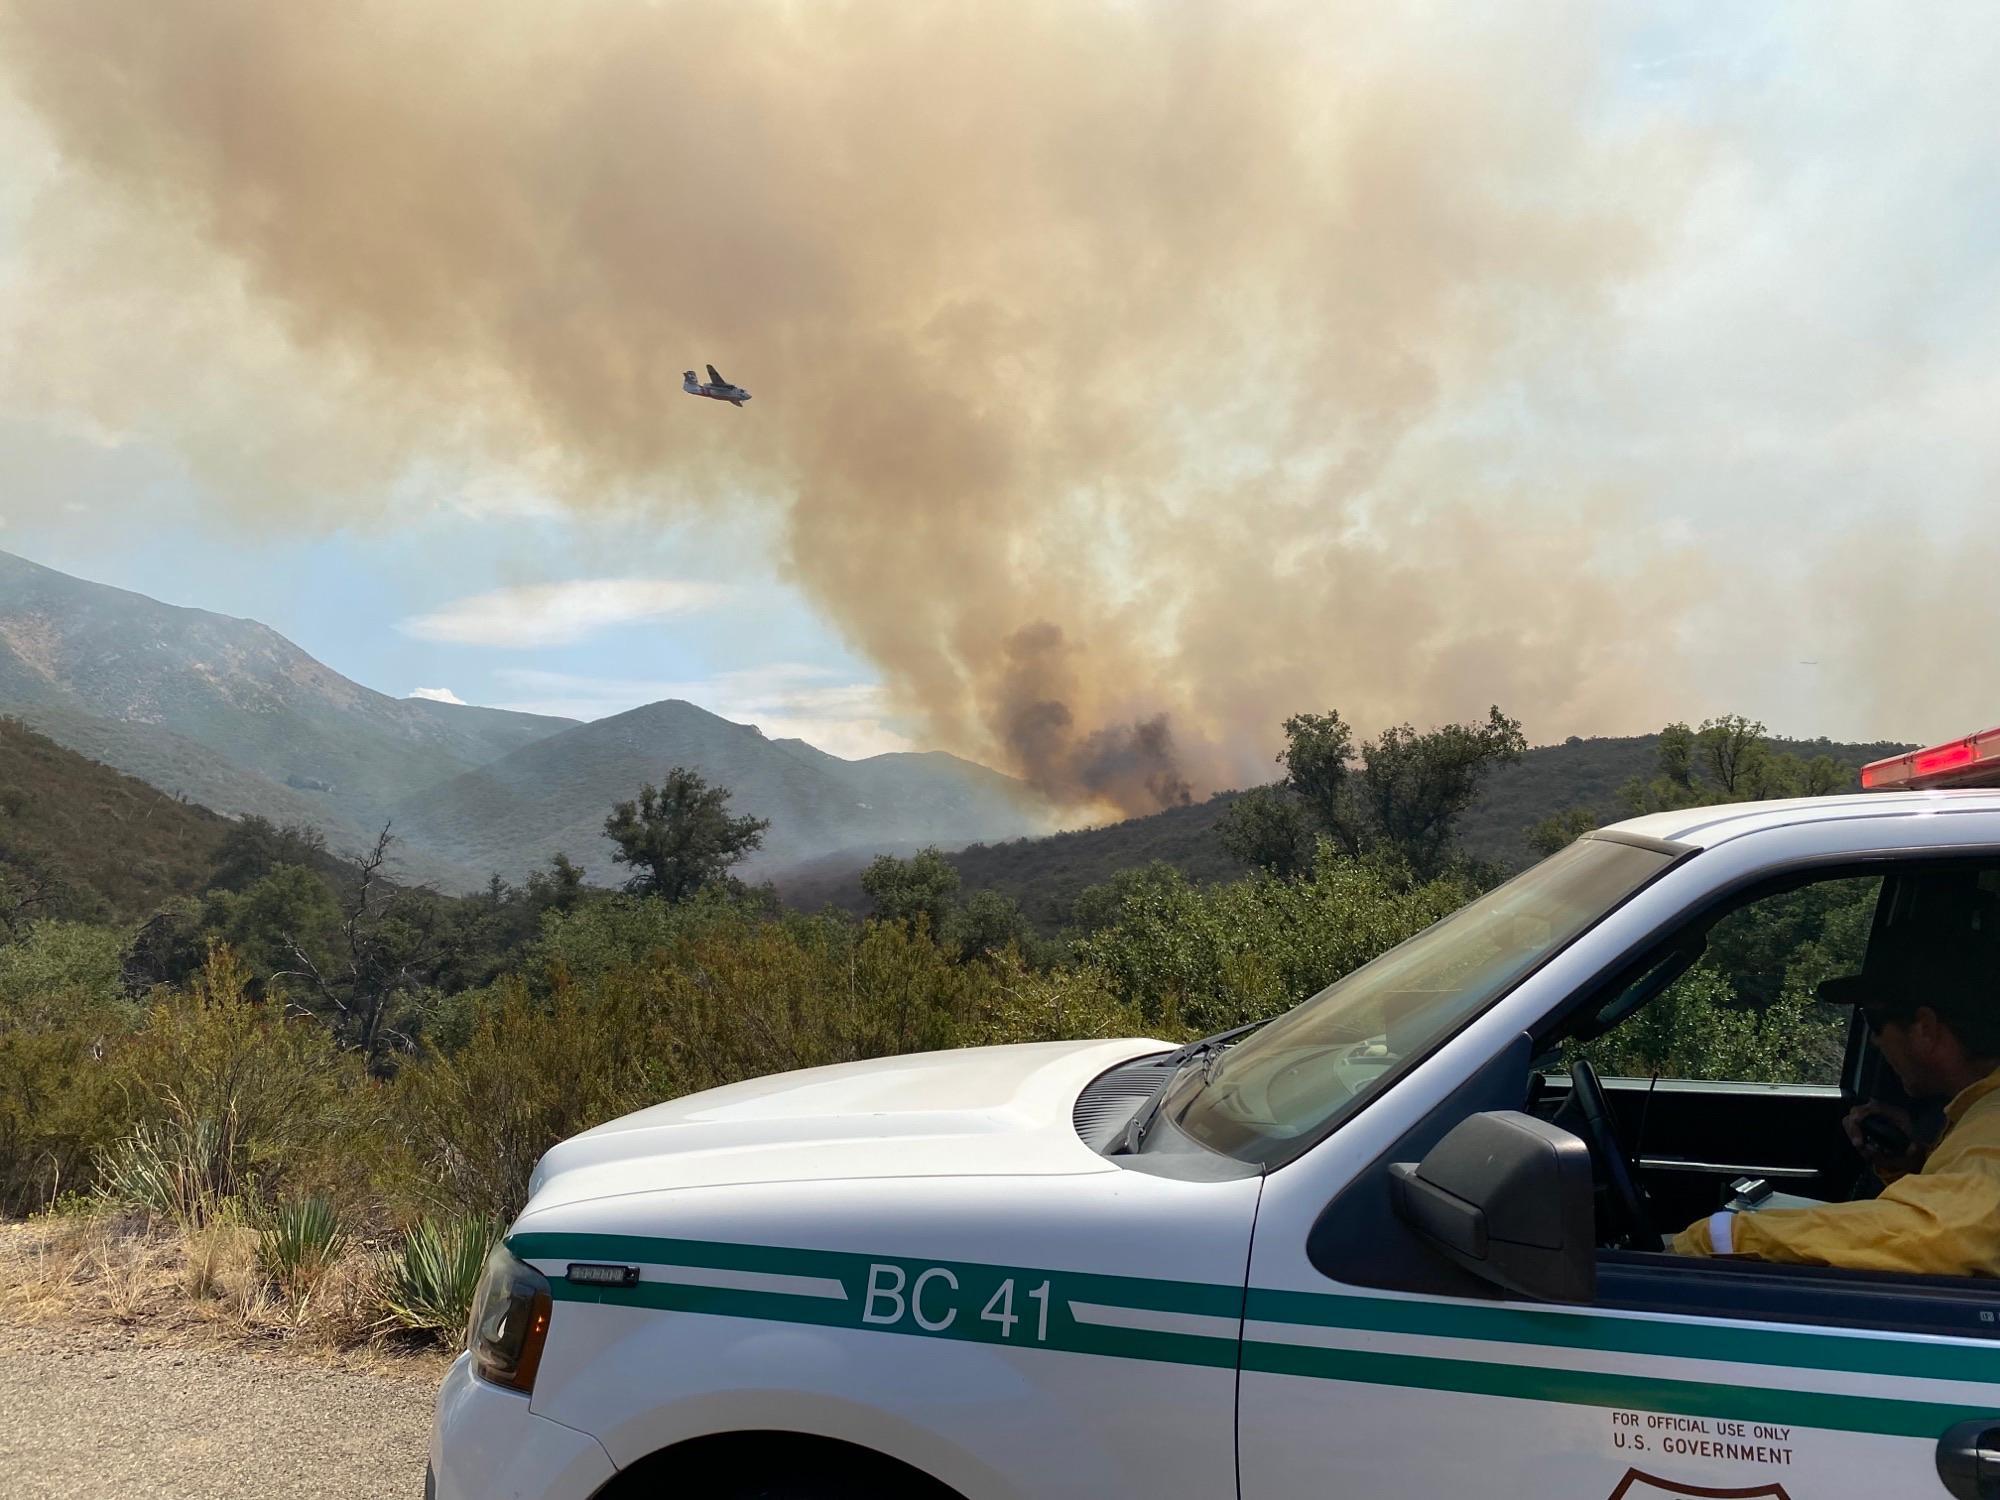 Smoke and an aircraft in the background of a parked forest service fire chief's vehicle